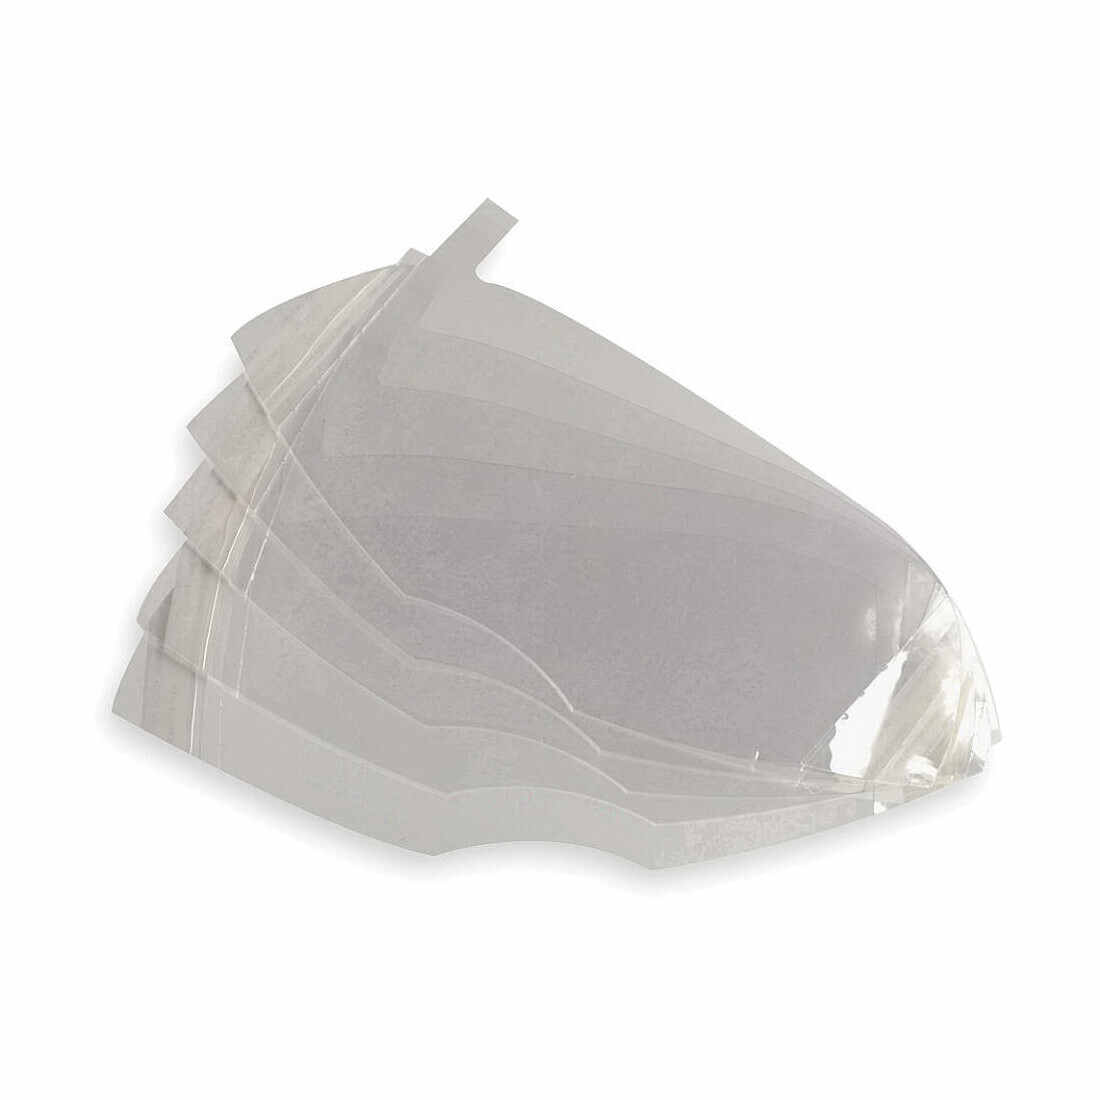 Honeywell Safety 80836A Peel Away Windows 15 per PK -  6 in -  For Use With North® 7600 Full Facepiece Respirator -  Plastic -  Clear